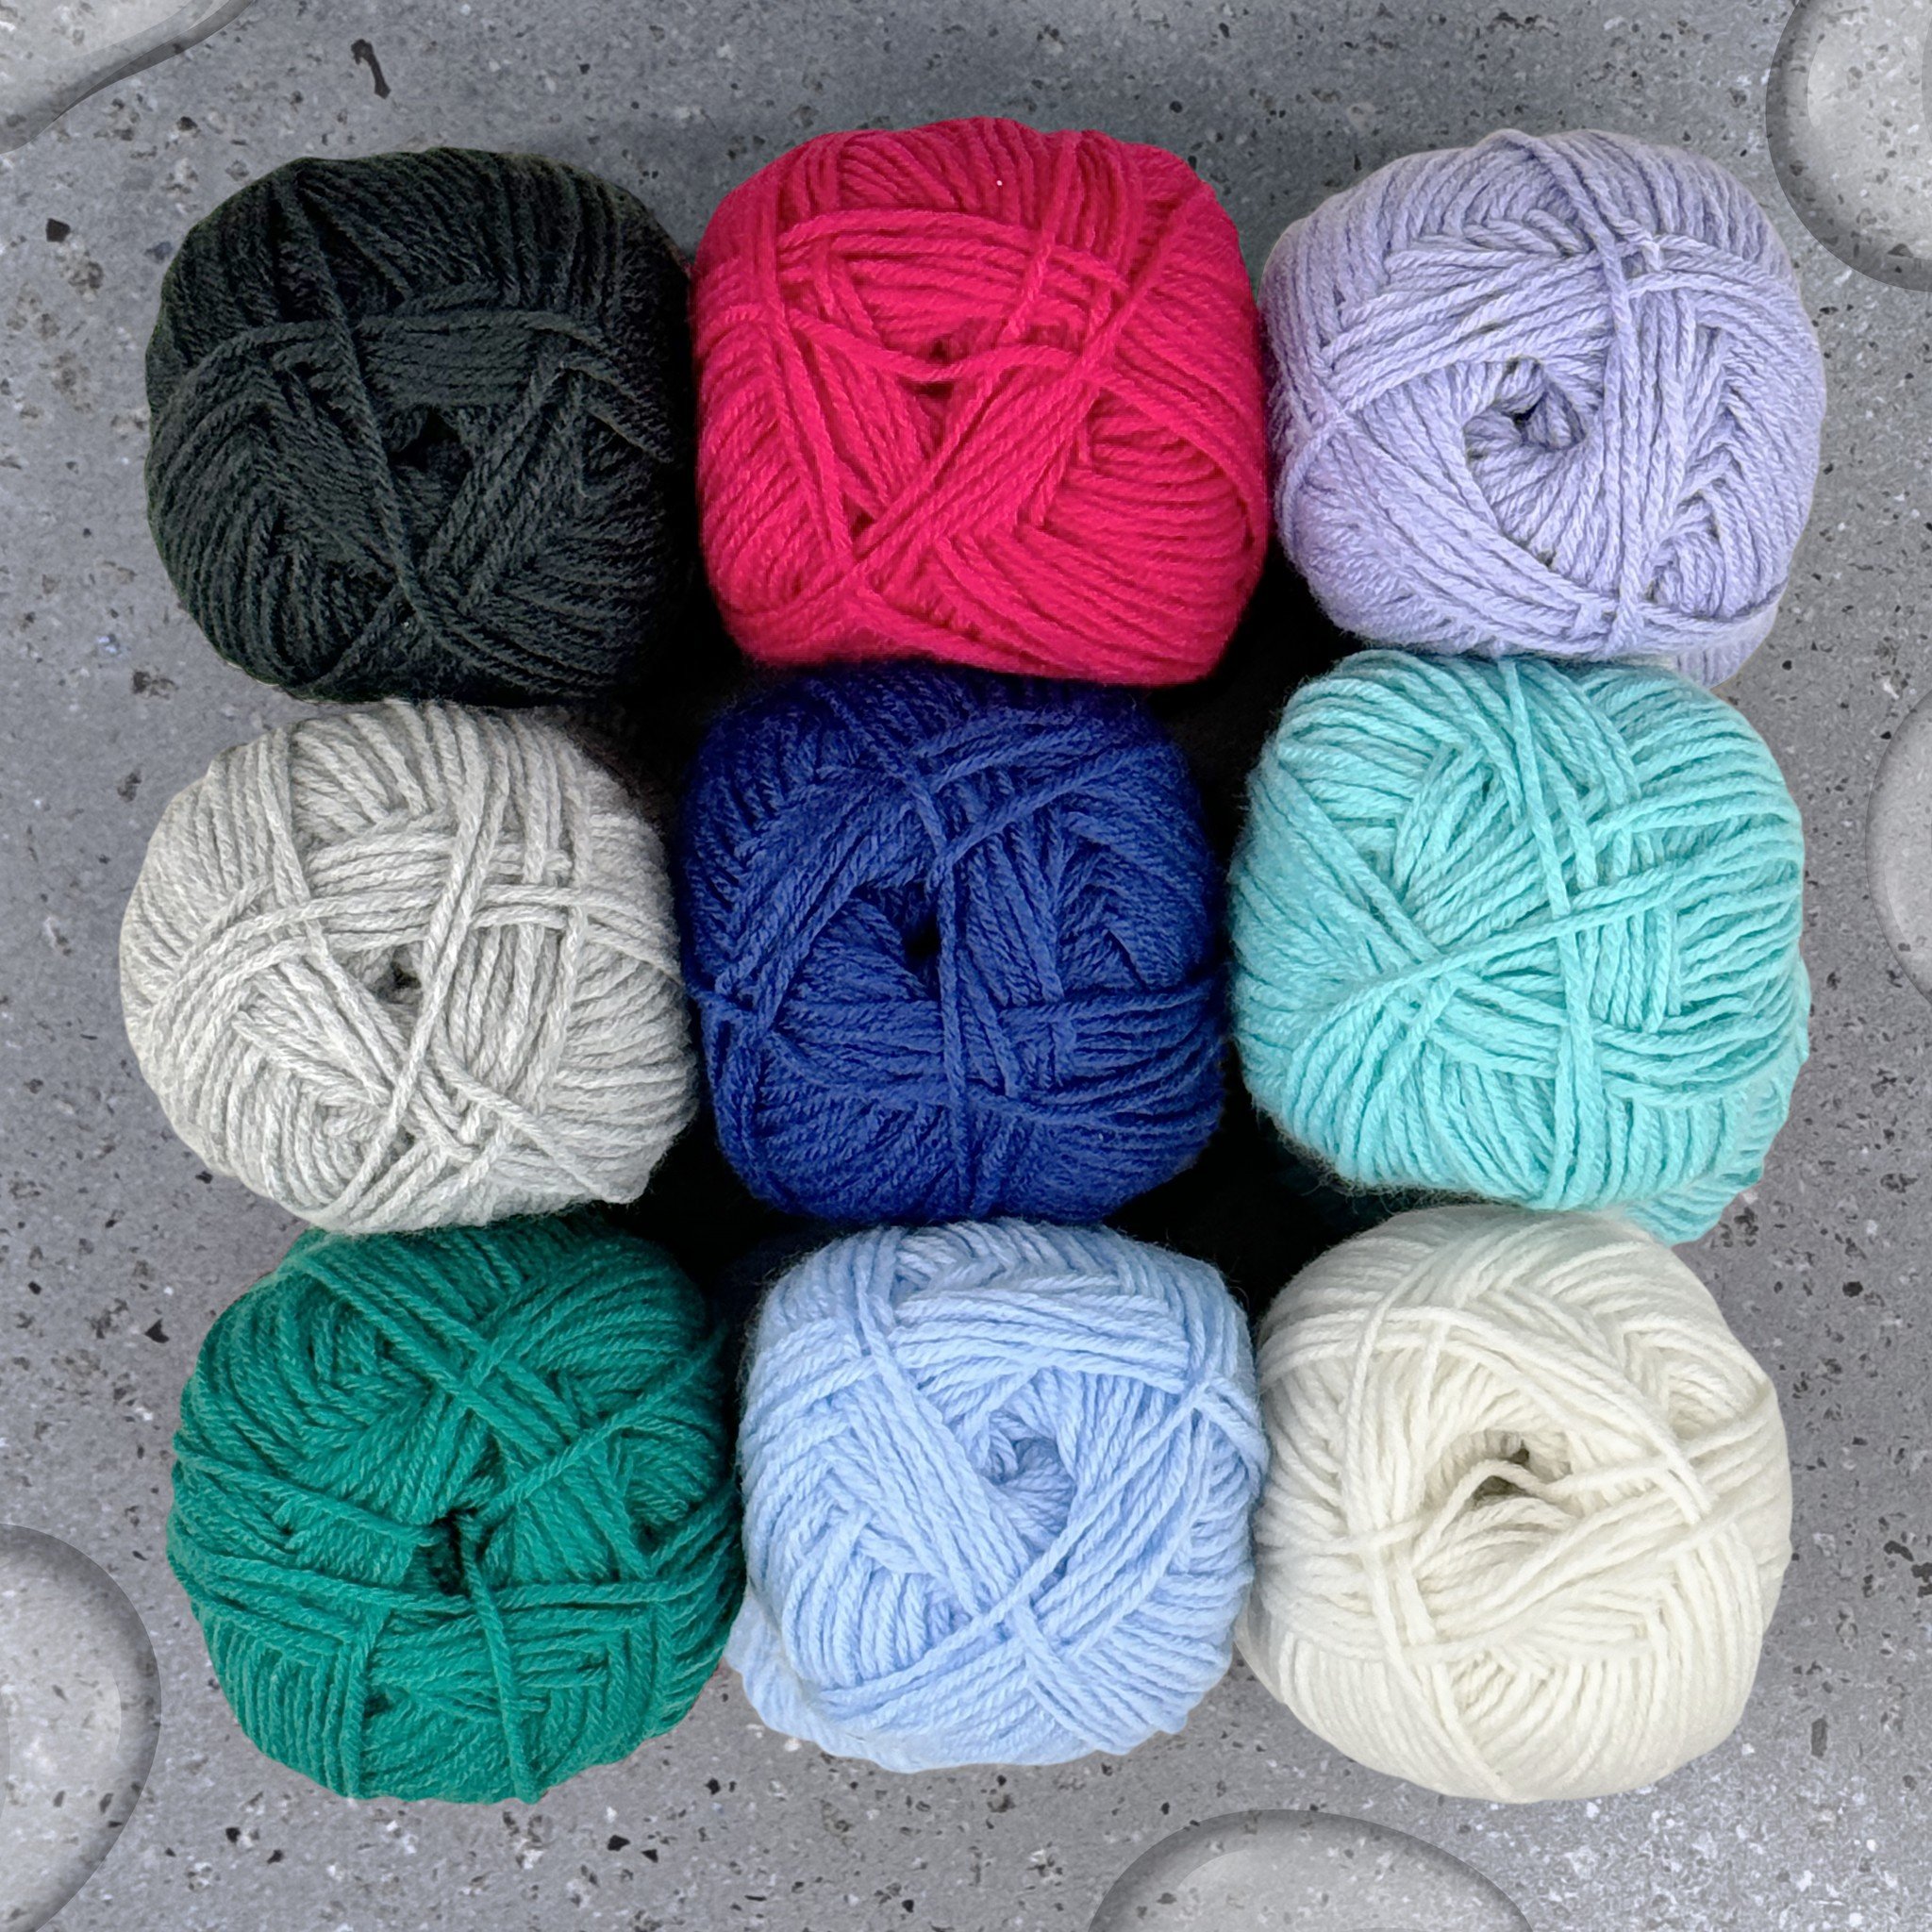 Berry red, emerald green, ice blue and stark black and white are just some of the stunning winter colours to include in your yarn selection. Think cool, bright and brilliant❄️🫧💙

#yarn #acrylicyarn #knit #knitting #crochet #sew #make #create #wear 